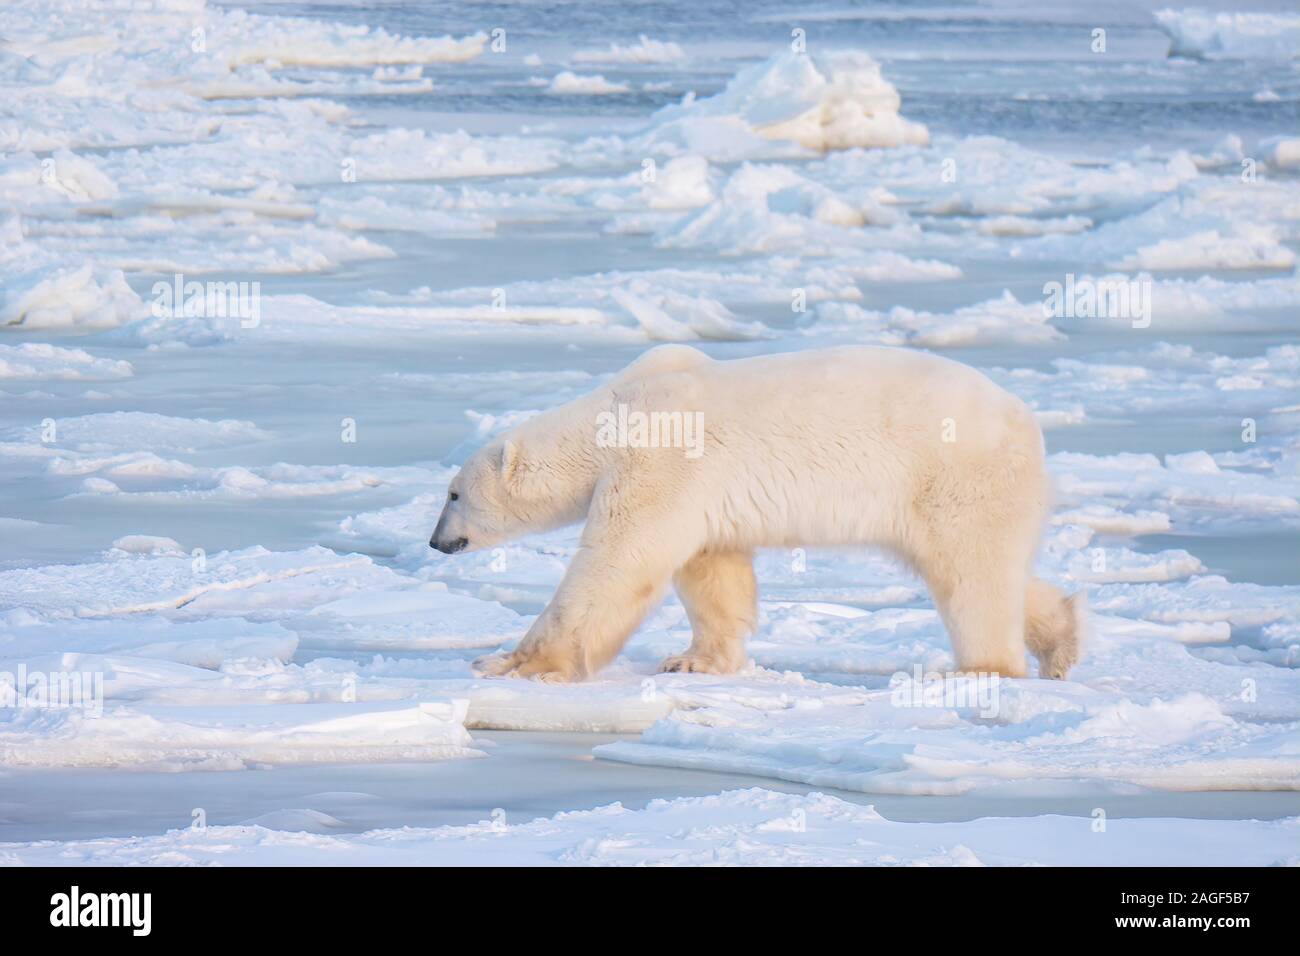 A winter scene showing a hungry adult male polar bear searching for food while walking on thin ice near open, unfrozen water in Hudson Bay, Canada. Stock Photo